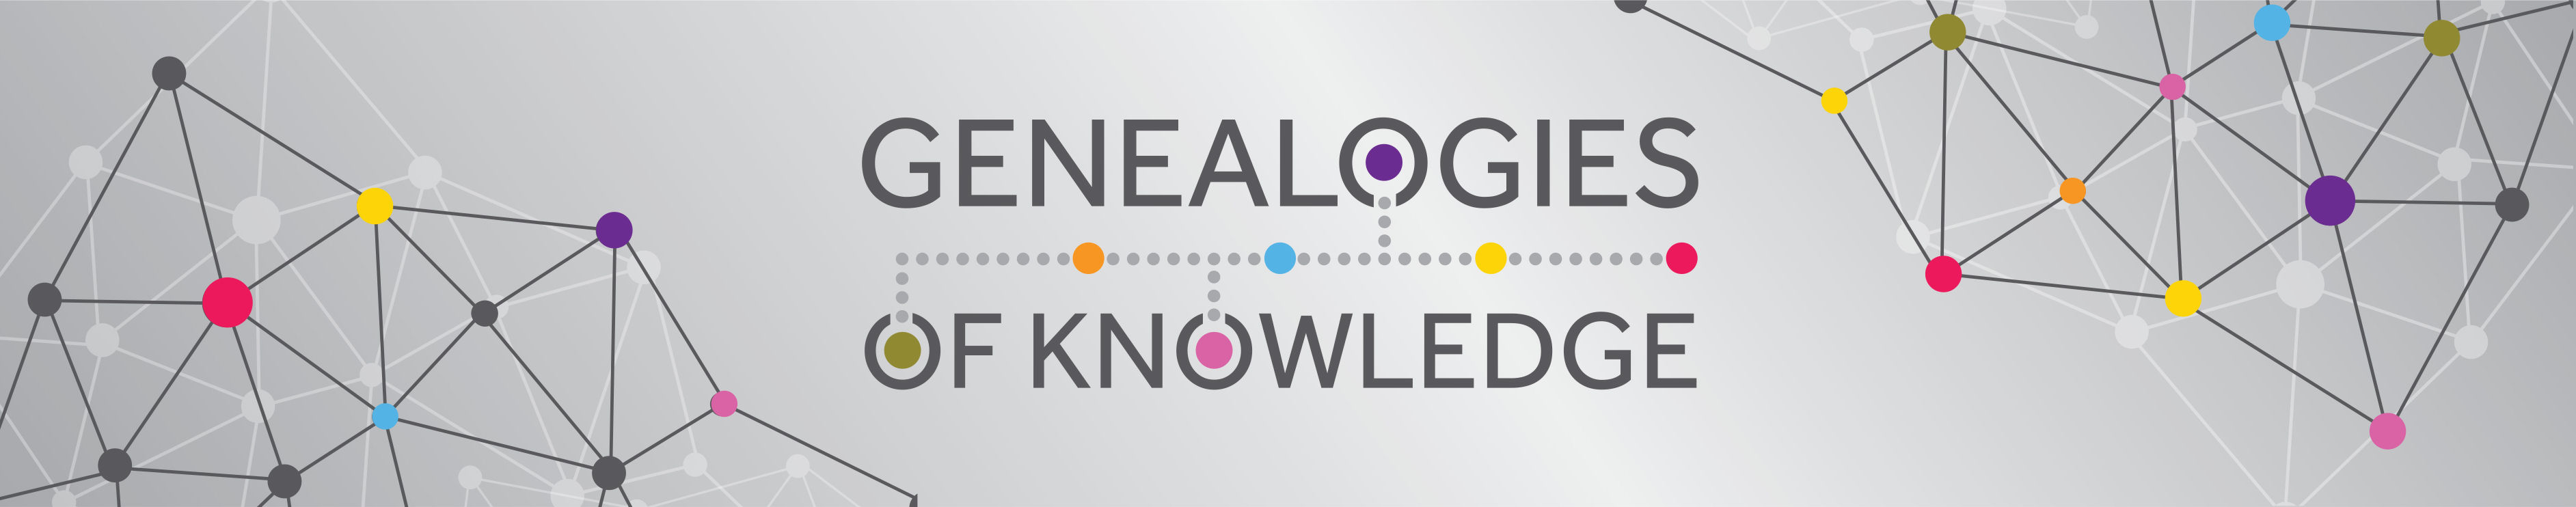 Genealogies of Knowledge: The Evolution and Contestation of Concepts across Time and Space